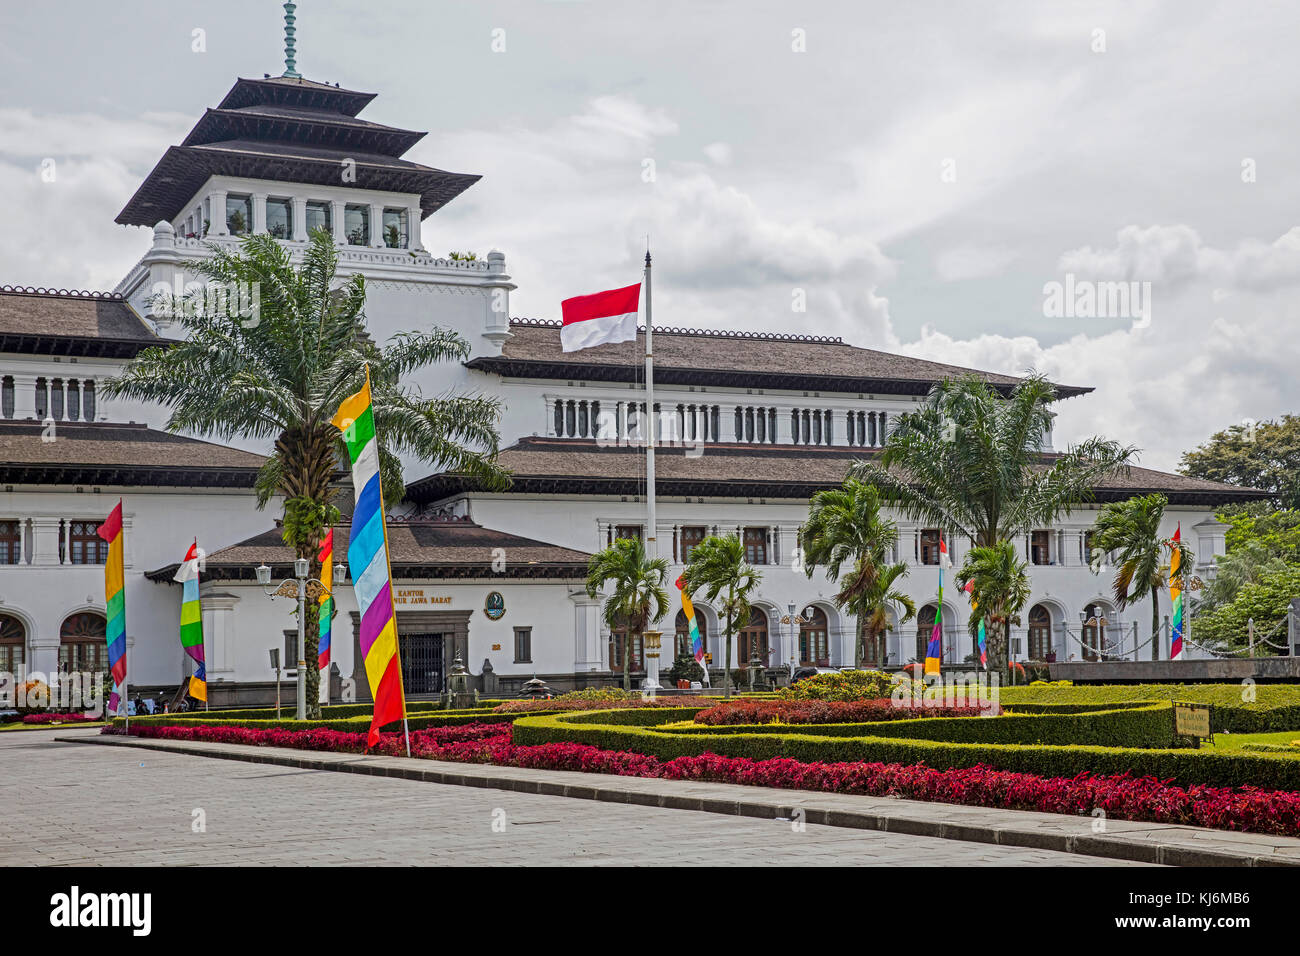 Gedung Sate, Dutch colonial building in Indo-European style, former seat of the Dutch East Indies in the city Bandung, West Java, Indonesia Stock Photo